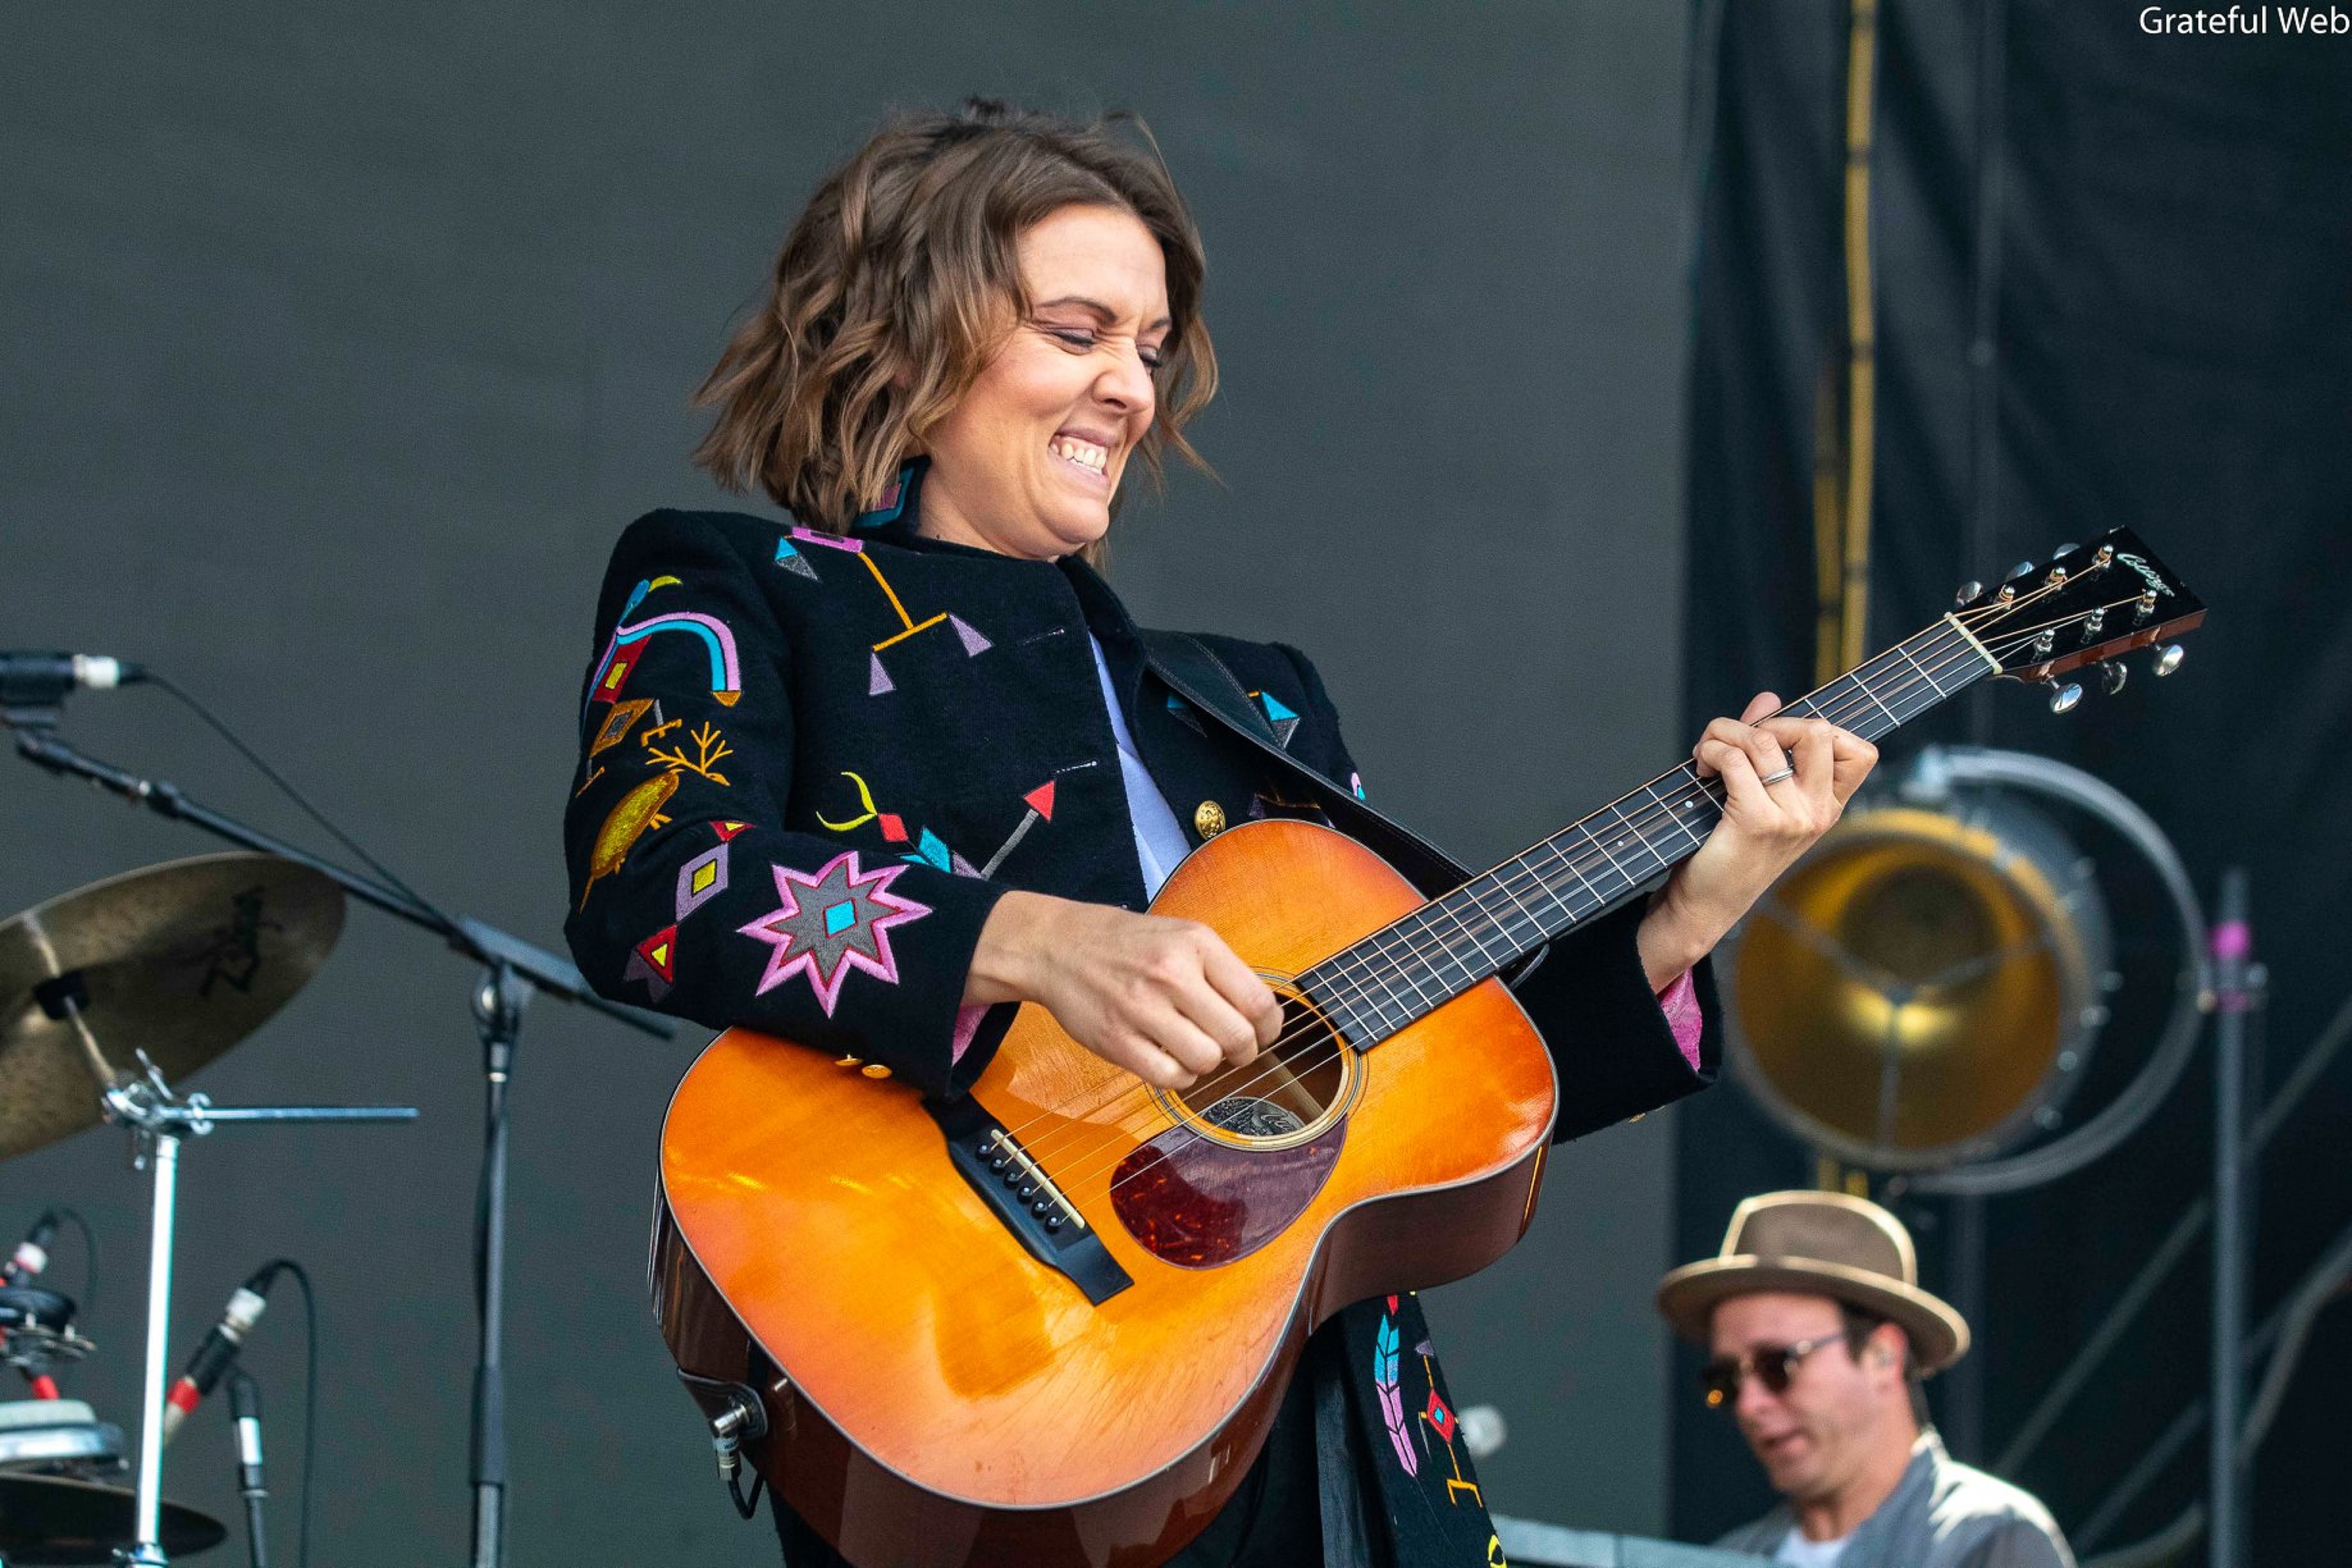 Brandi Carlile nominated for five awards at 64th Annual GRAMMY Awards